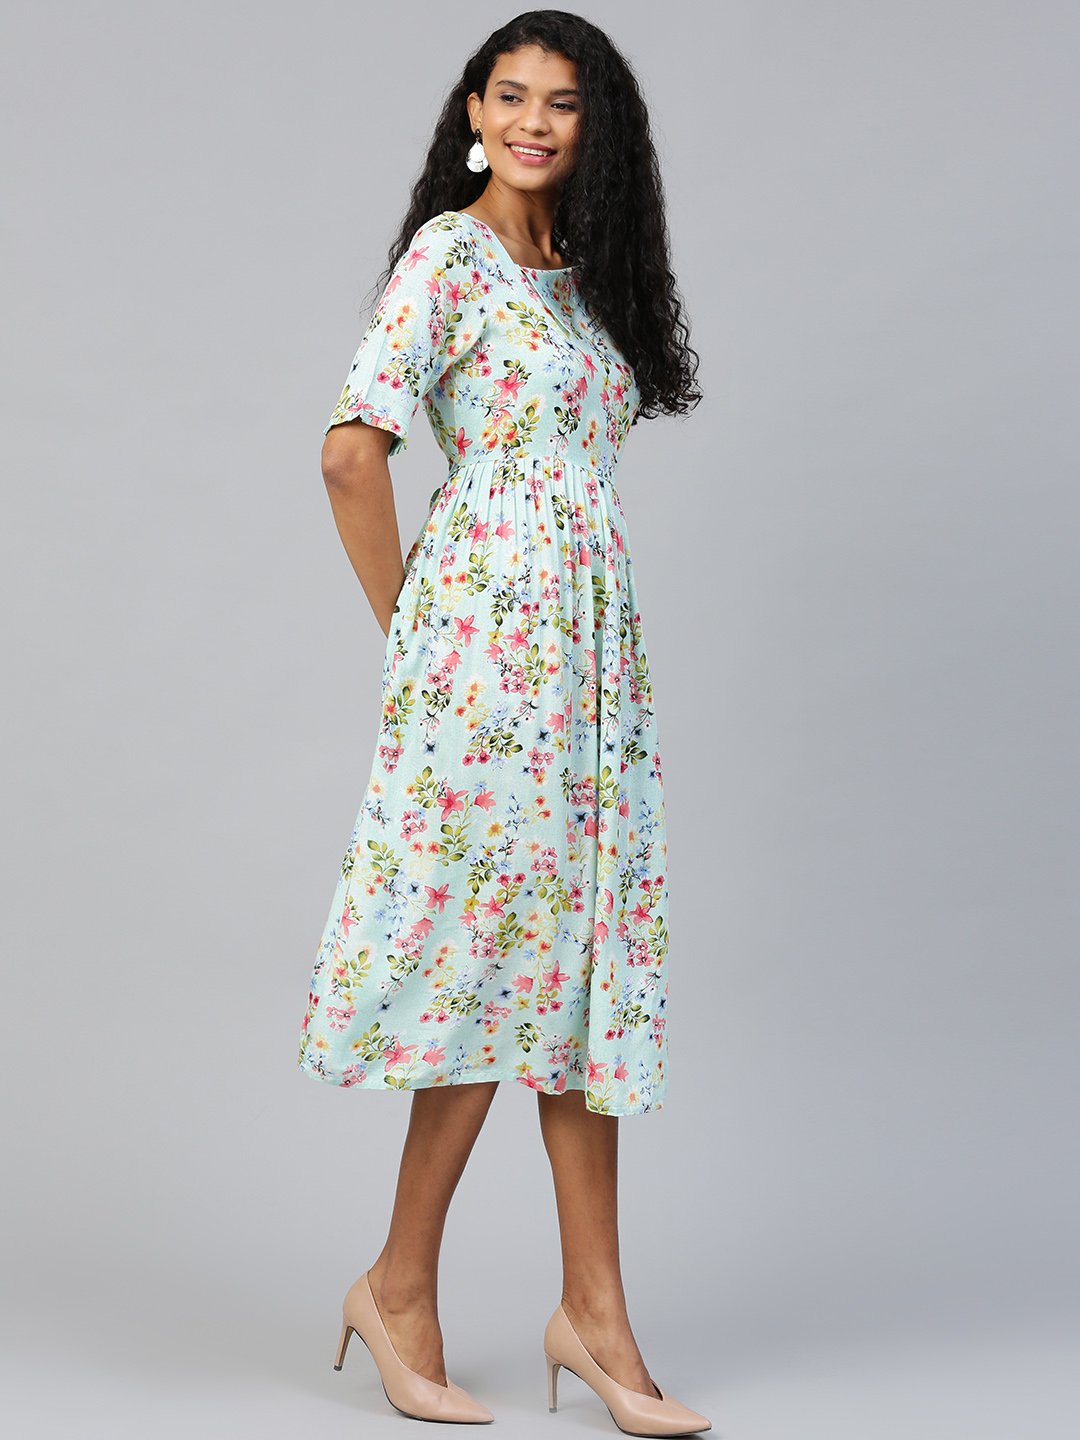 Women's Blue Floral Printed Square Neck Viscose Rayon Fit And Flare Dress - Nayo Clothing